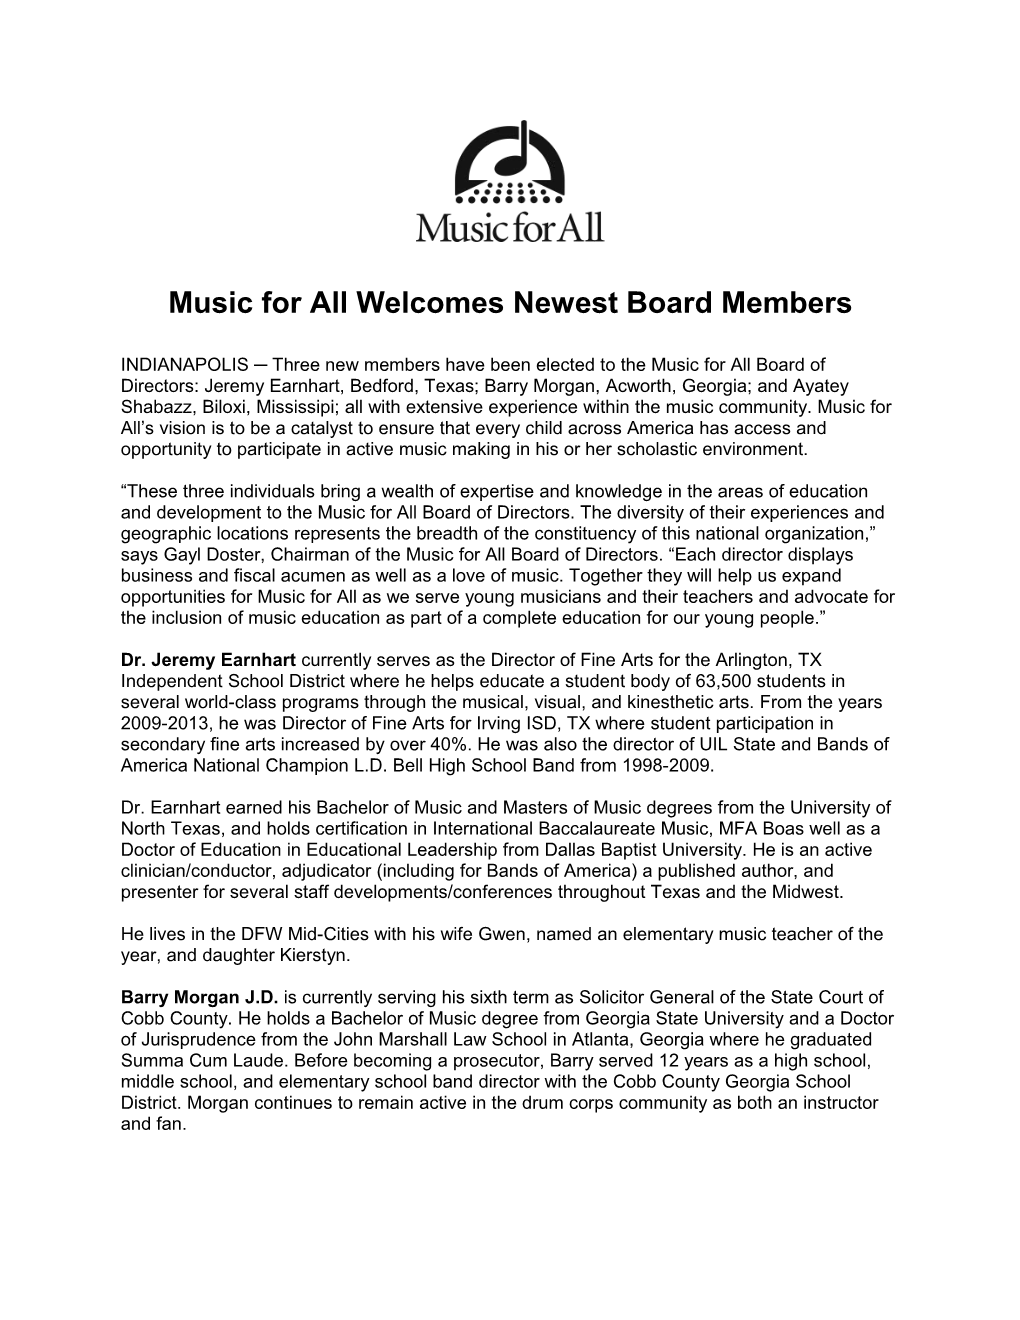 Music for All Welcomes Newest Board Members